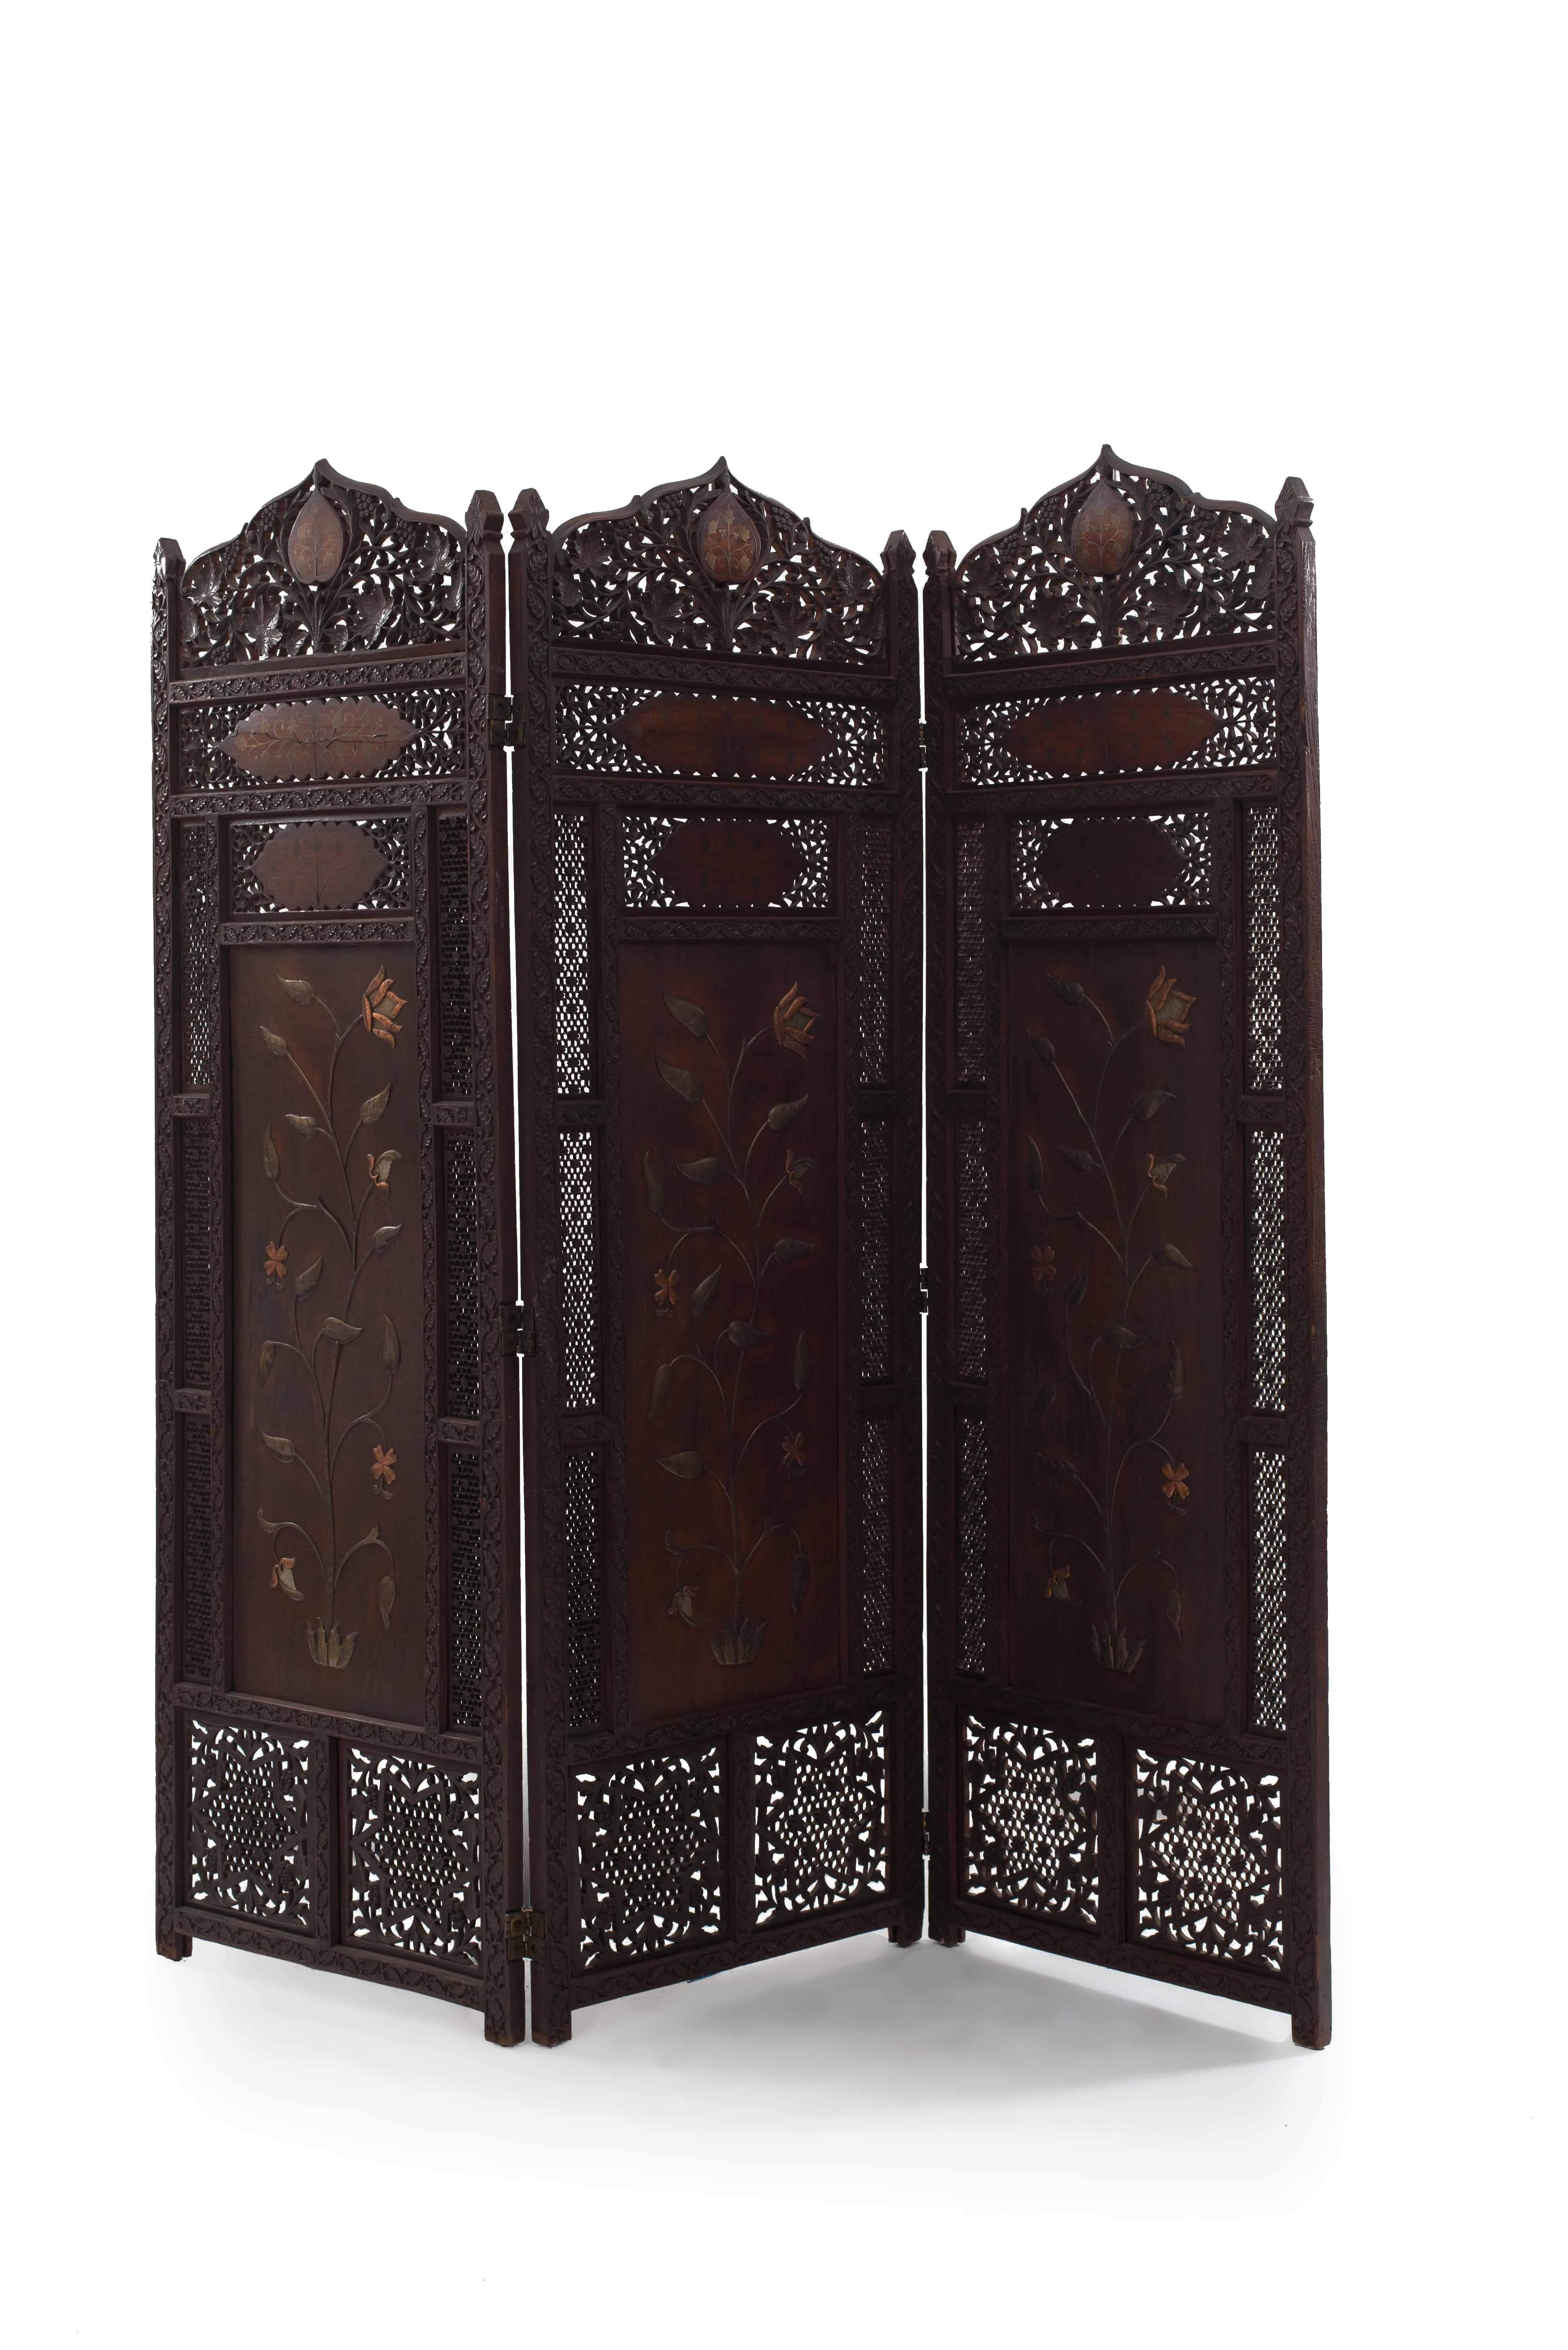 19th Century 19th c. Middle Eastern Filigreed Folding Screen For Sale